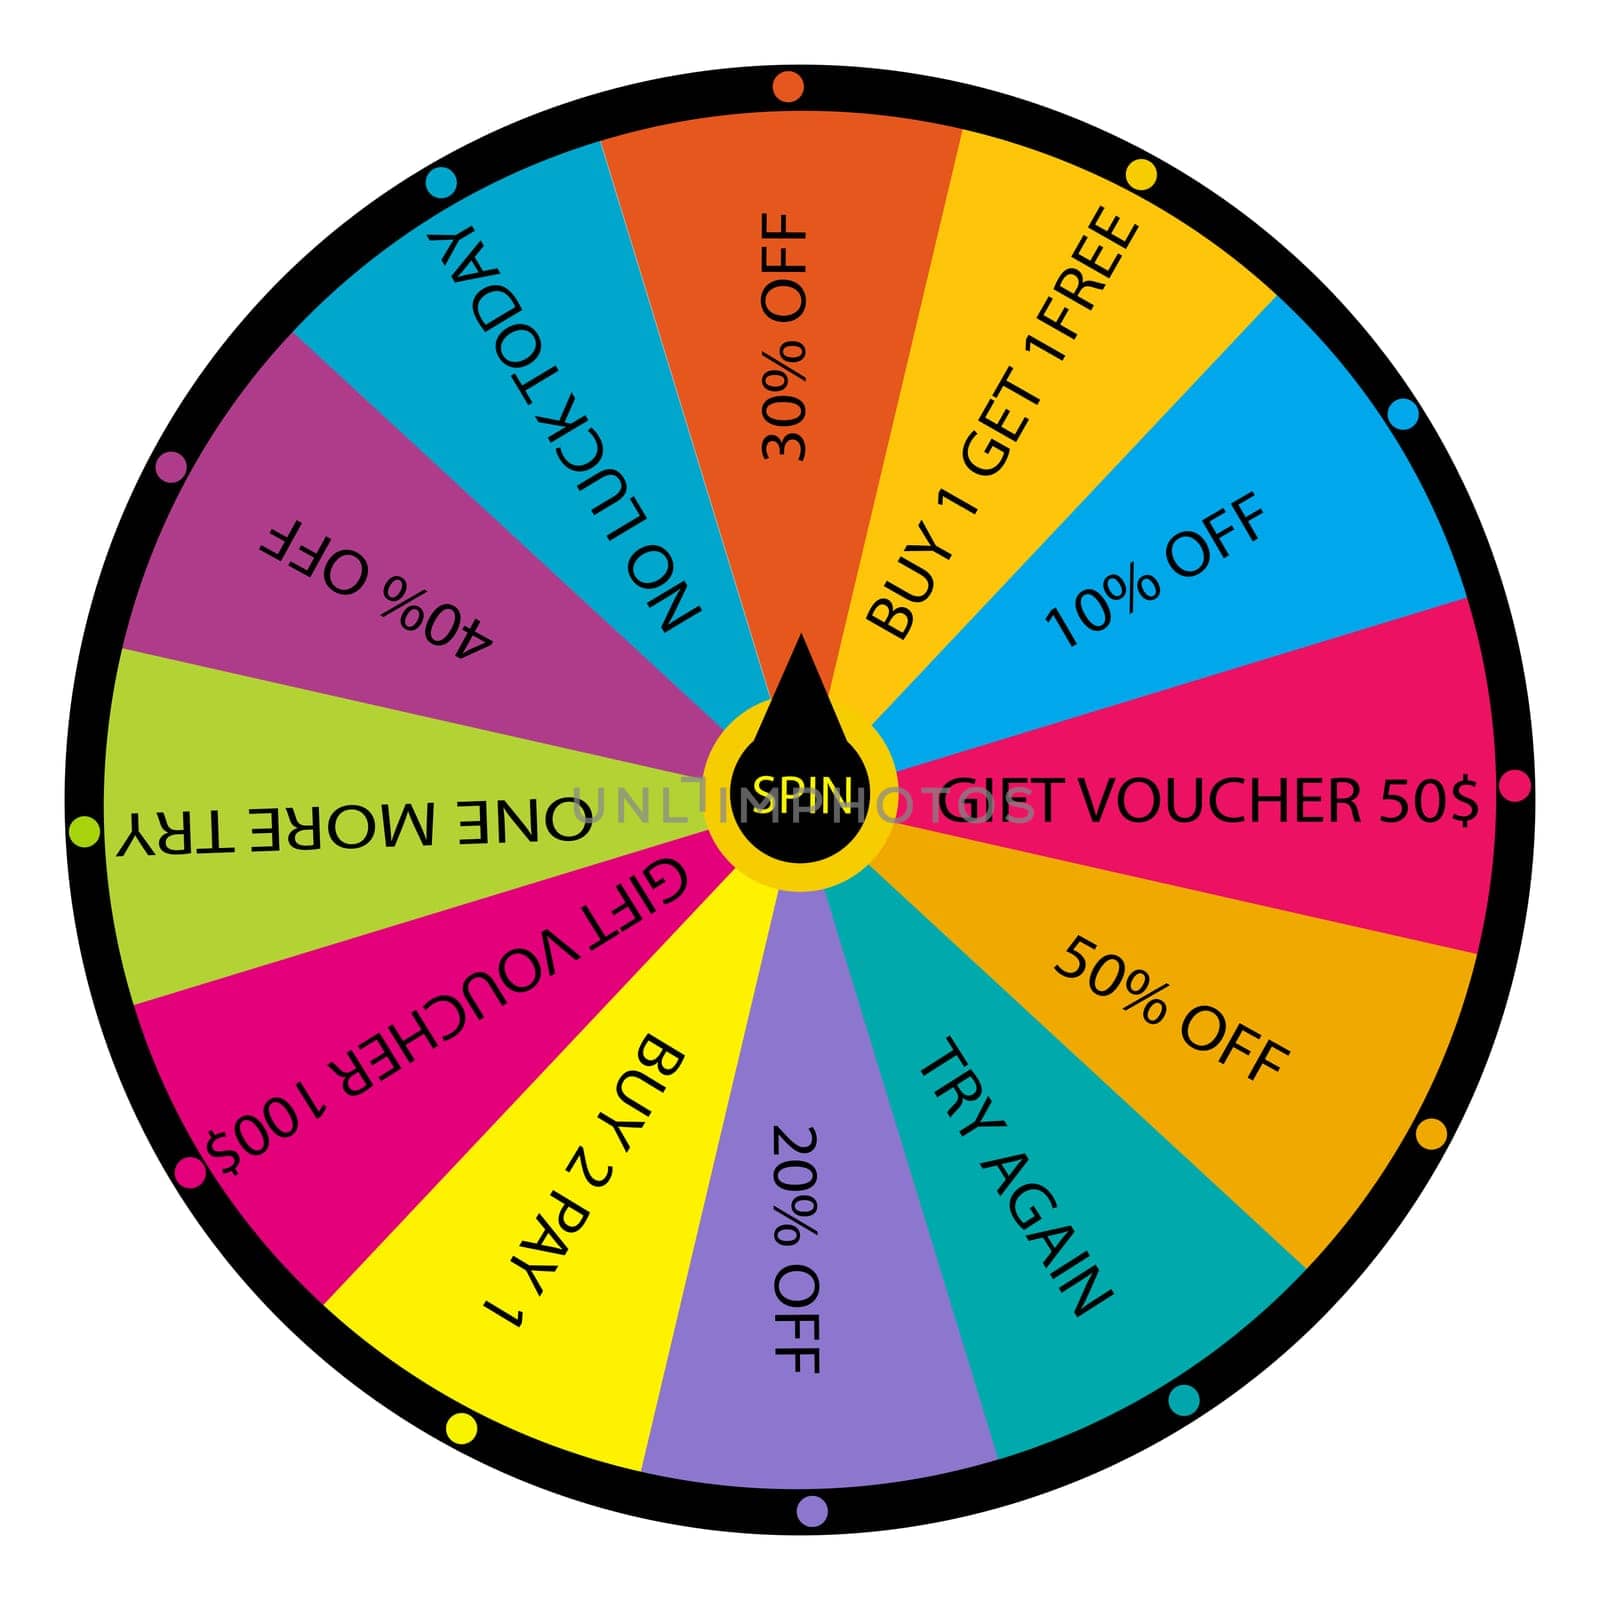 The wheel of fortune with voucher prizes and discounts or commercial offers